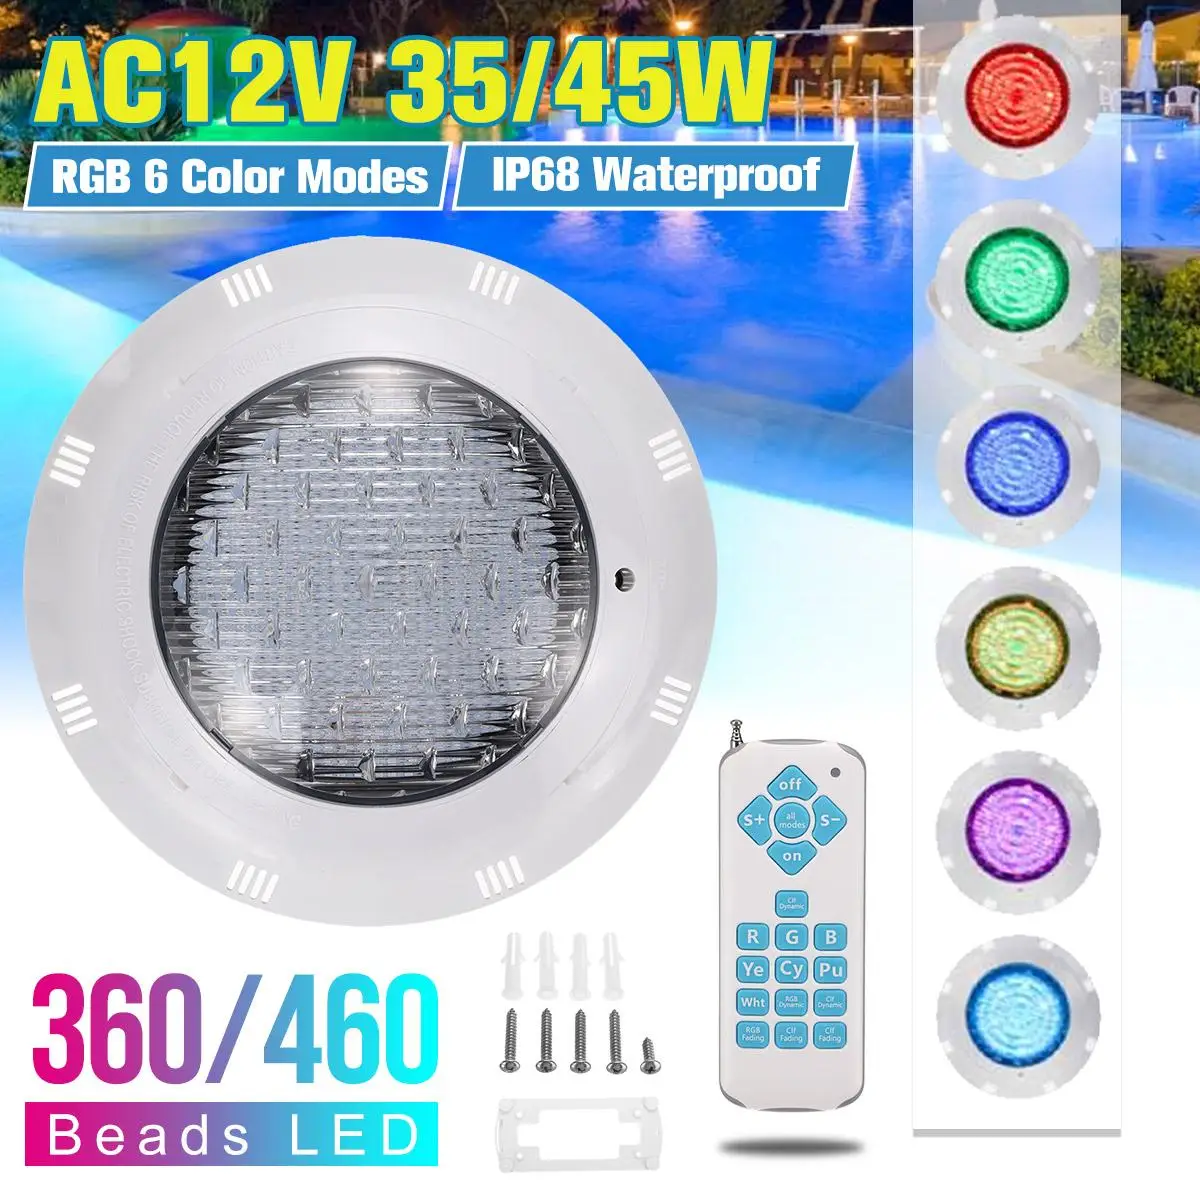 45W LED Underwater Swimming Pool Lights AC12V RGB Color Changing IP68 Waterproof Lamp With Remote Controller For Wedding Party